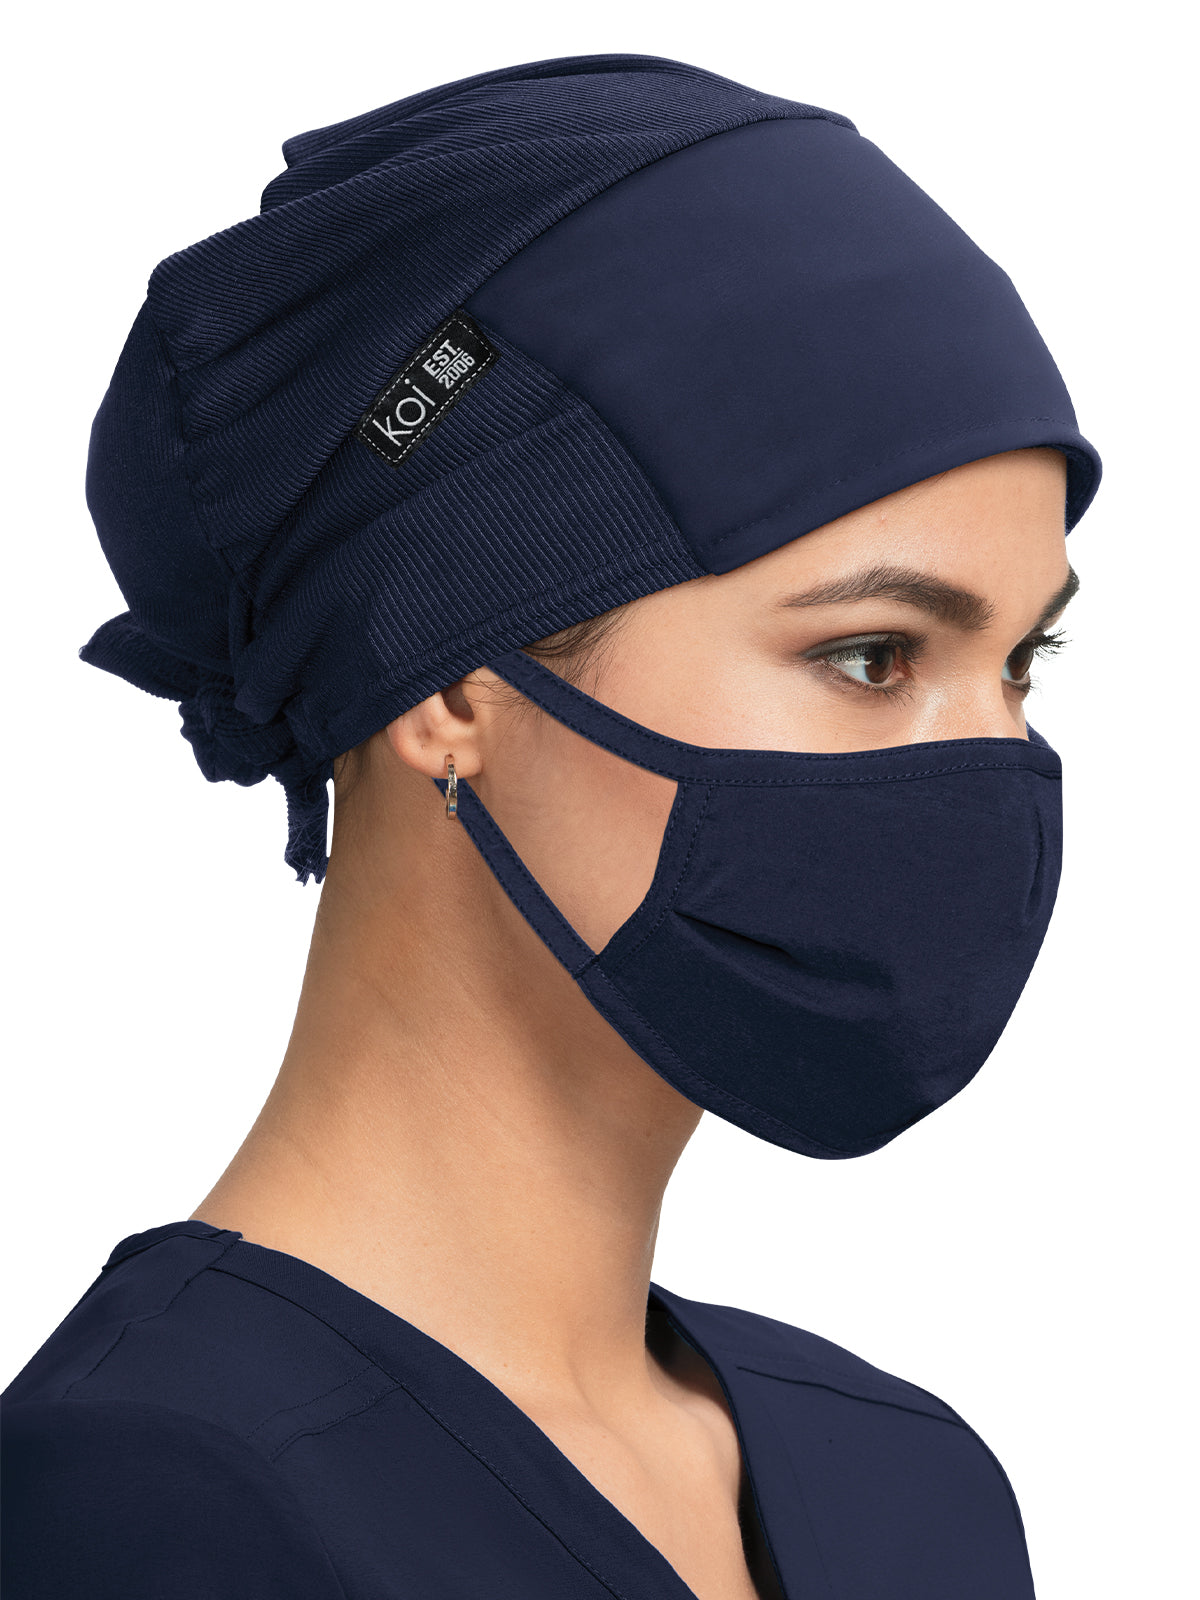 Unisex Surgical Hat - A161 - Navy